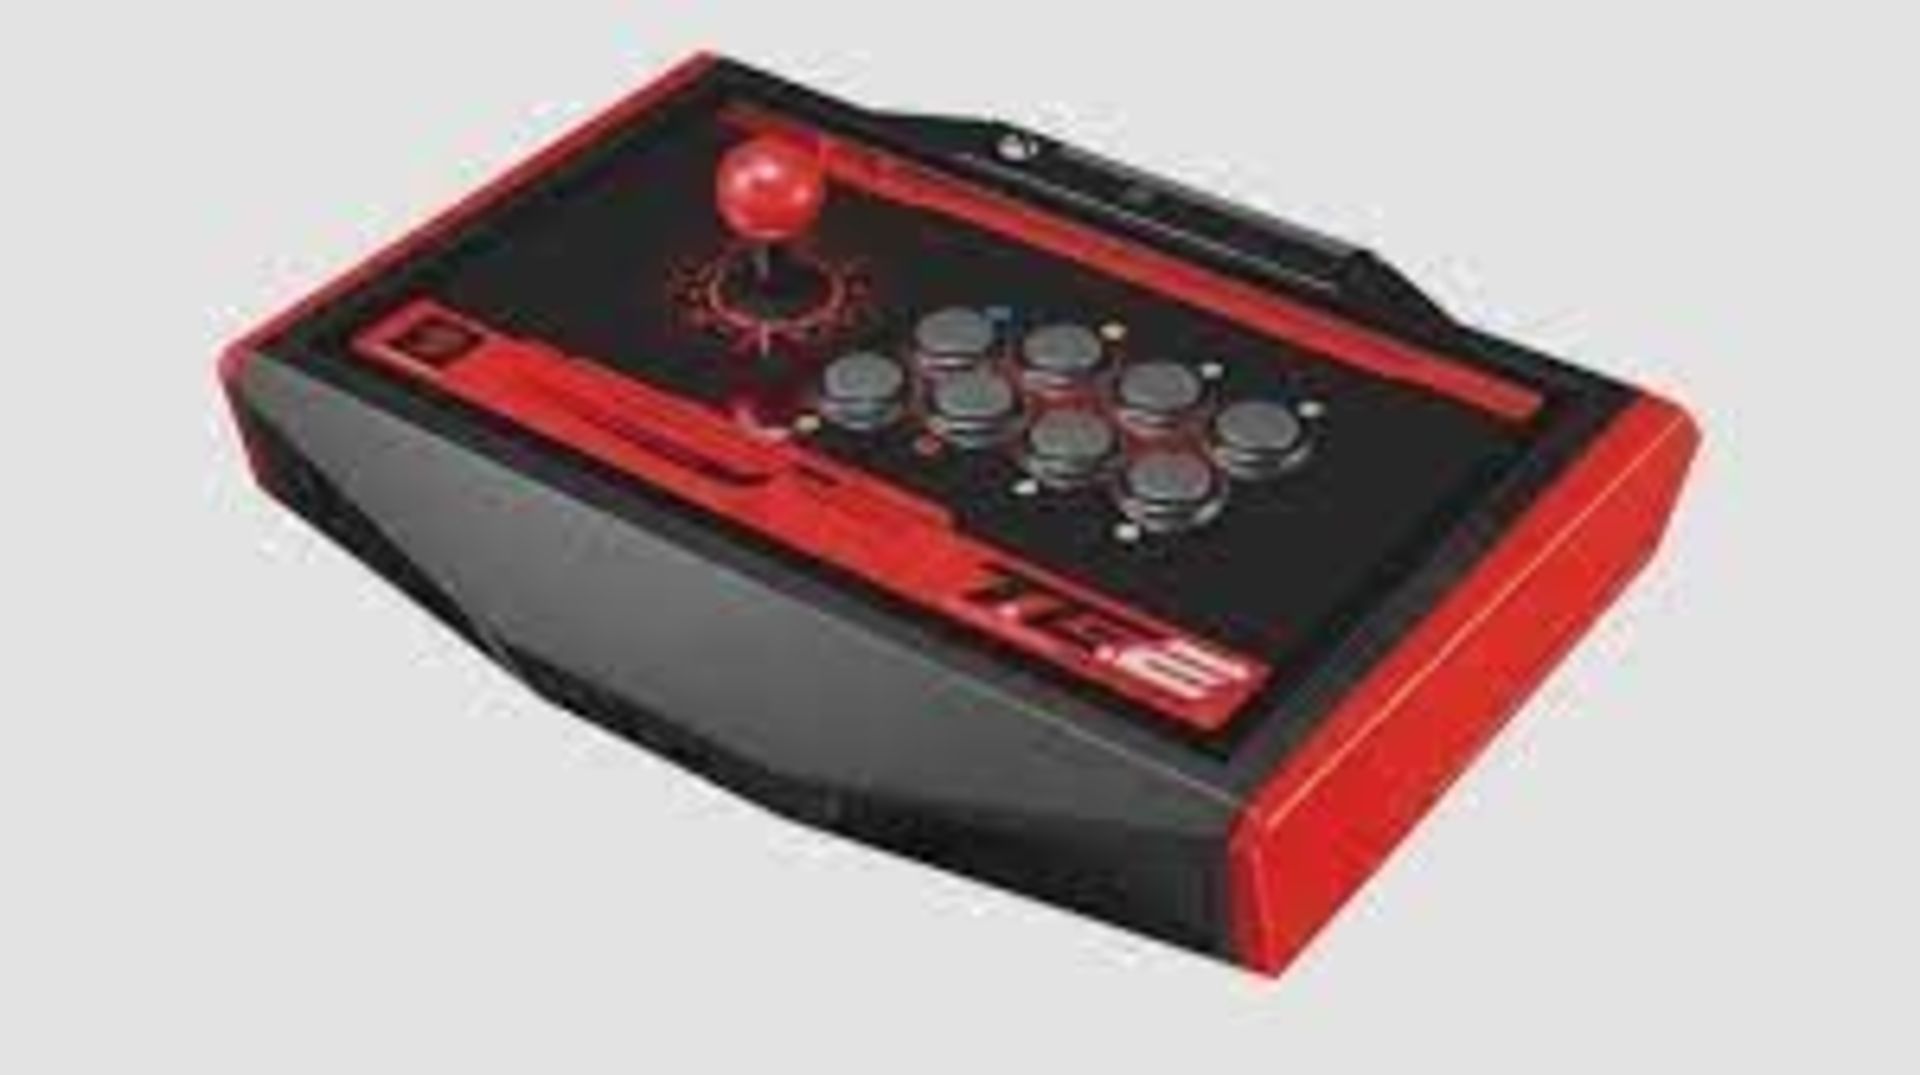 Madcatz TE2 Arcade Fightstick. RRP £260.00 - ER21.This competition-ready FightStick uses high-